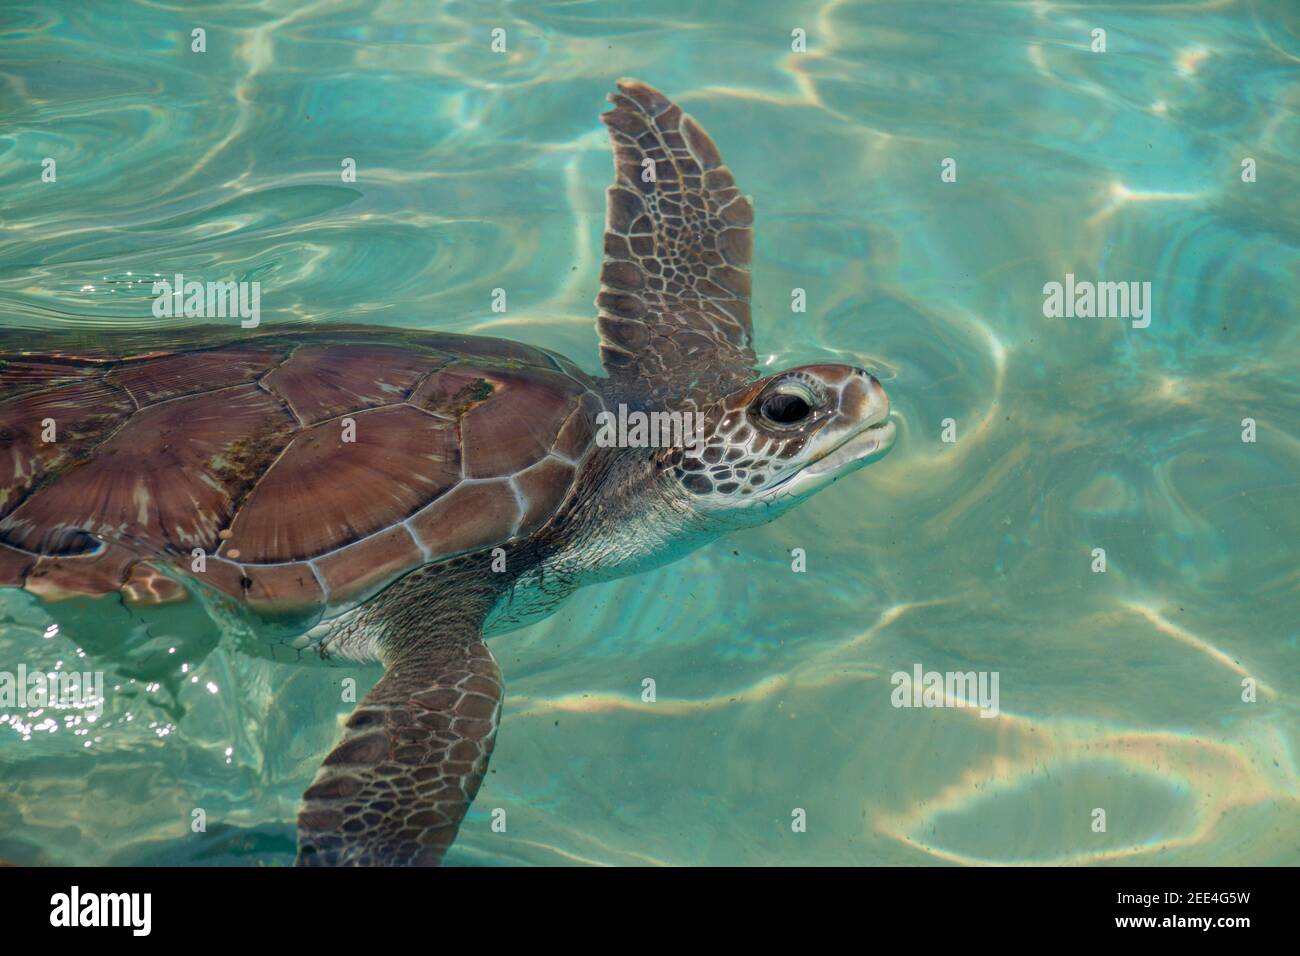 Turtle swimming in water, Caribbean Stock Photo